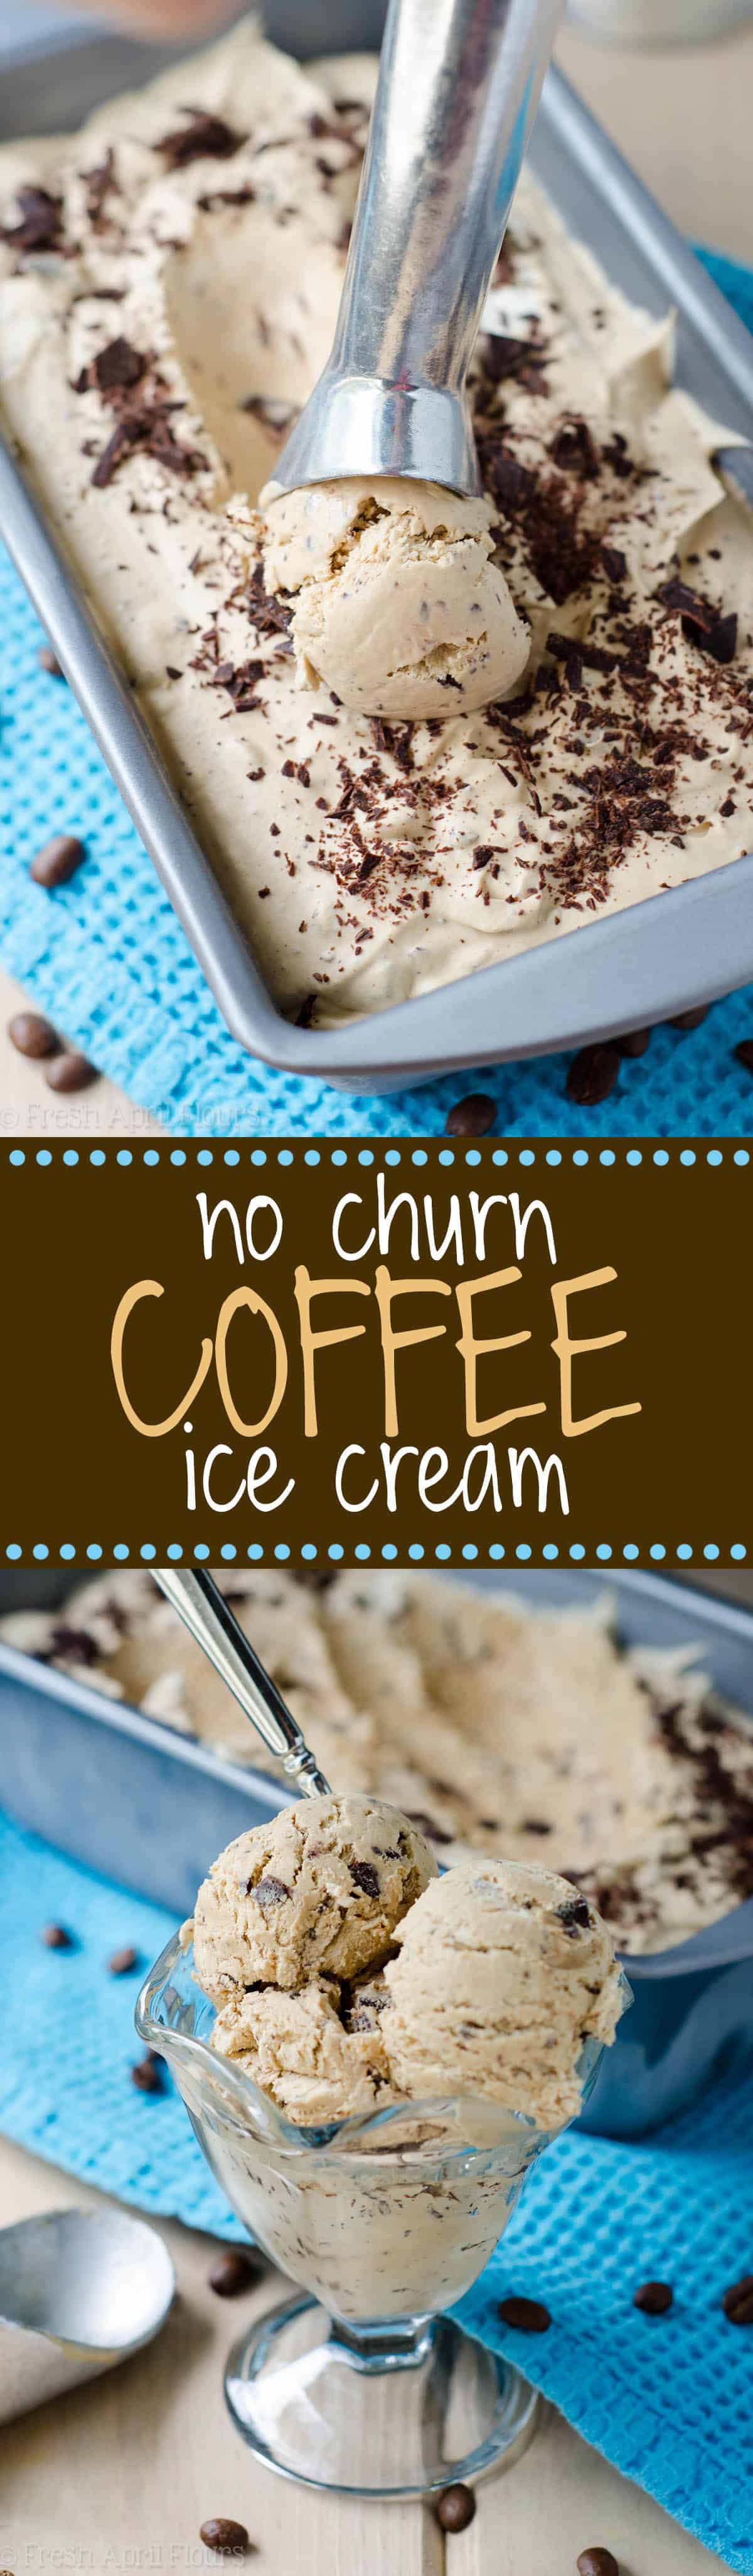 No Churn Coffee Ice Cream: Creamy, full-bodied coffee ice cream complemented by rich chocolate chunks. via @frshaprilflours